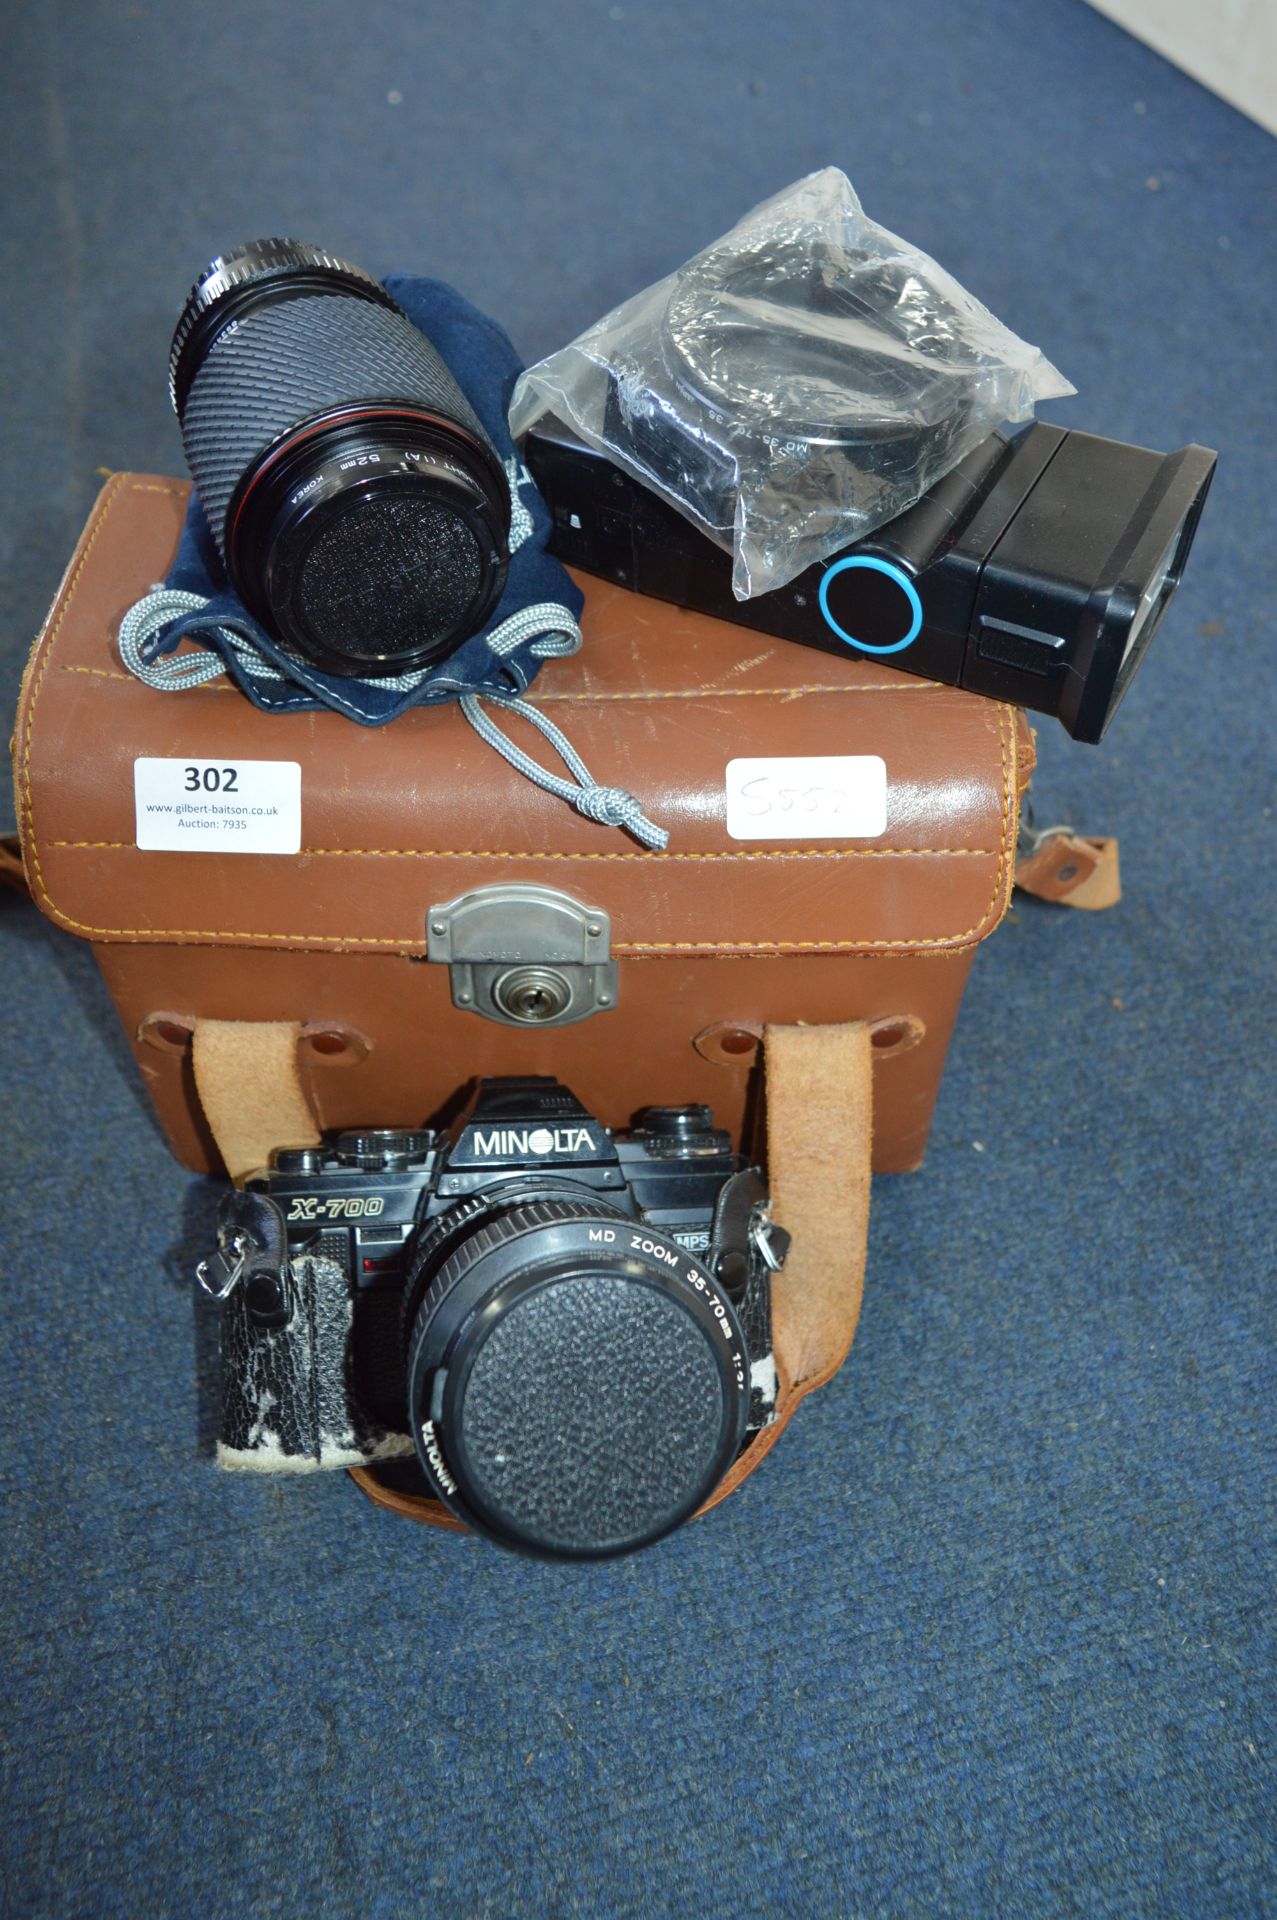 Minolta X700 Camera with Lens, Flash and Leather C